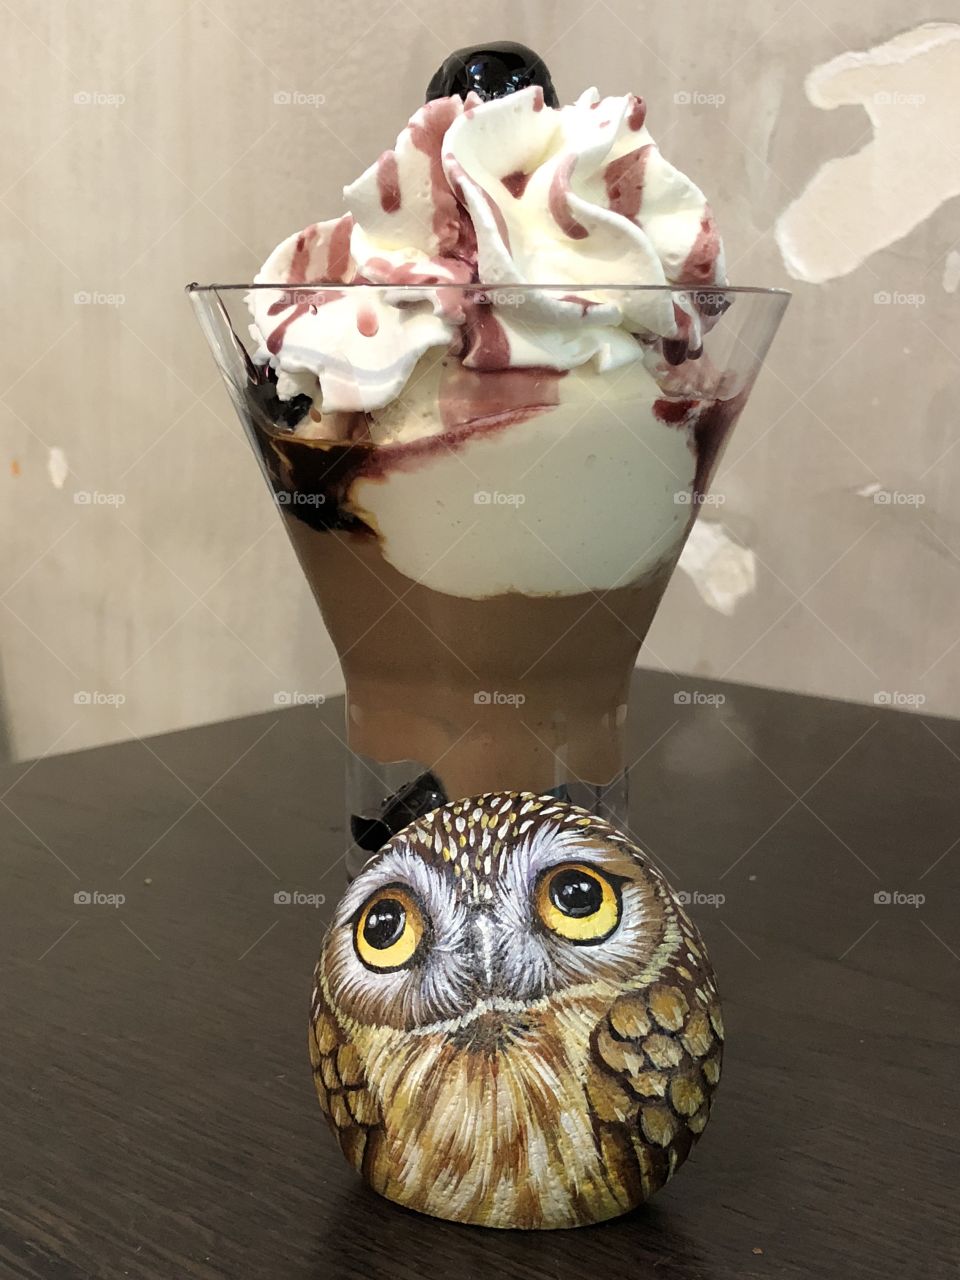 Italia ice cream with sour cherries and a stone owl